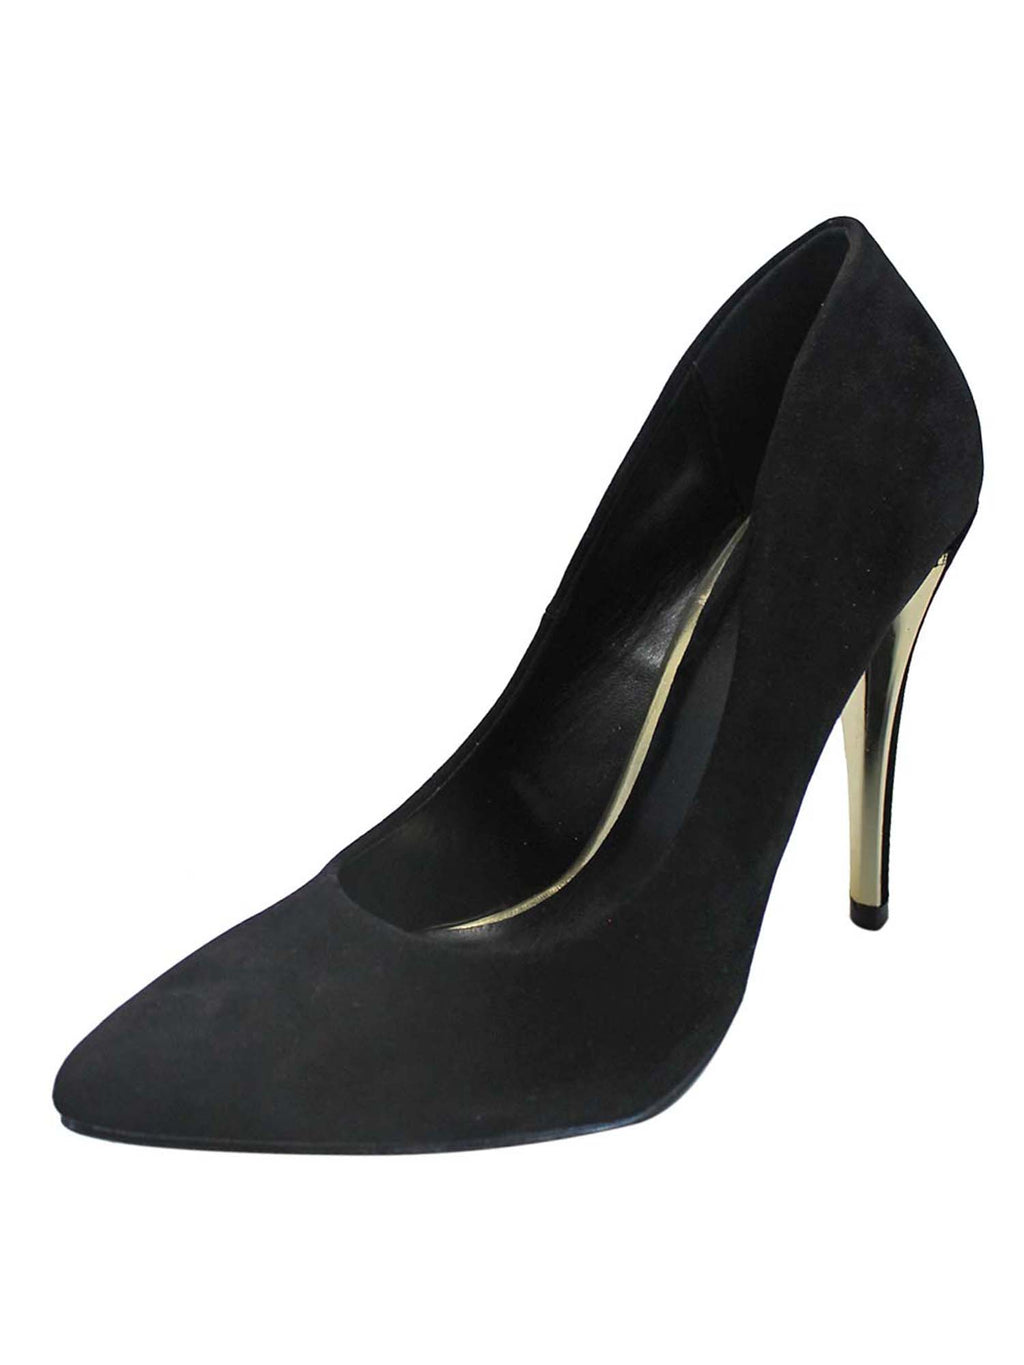 Black Pointed Toe Stiletto Pumps For Women